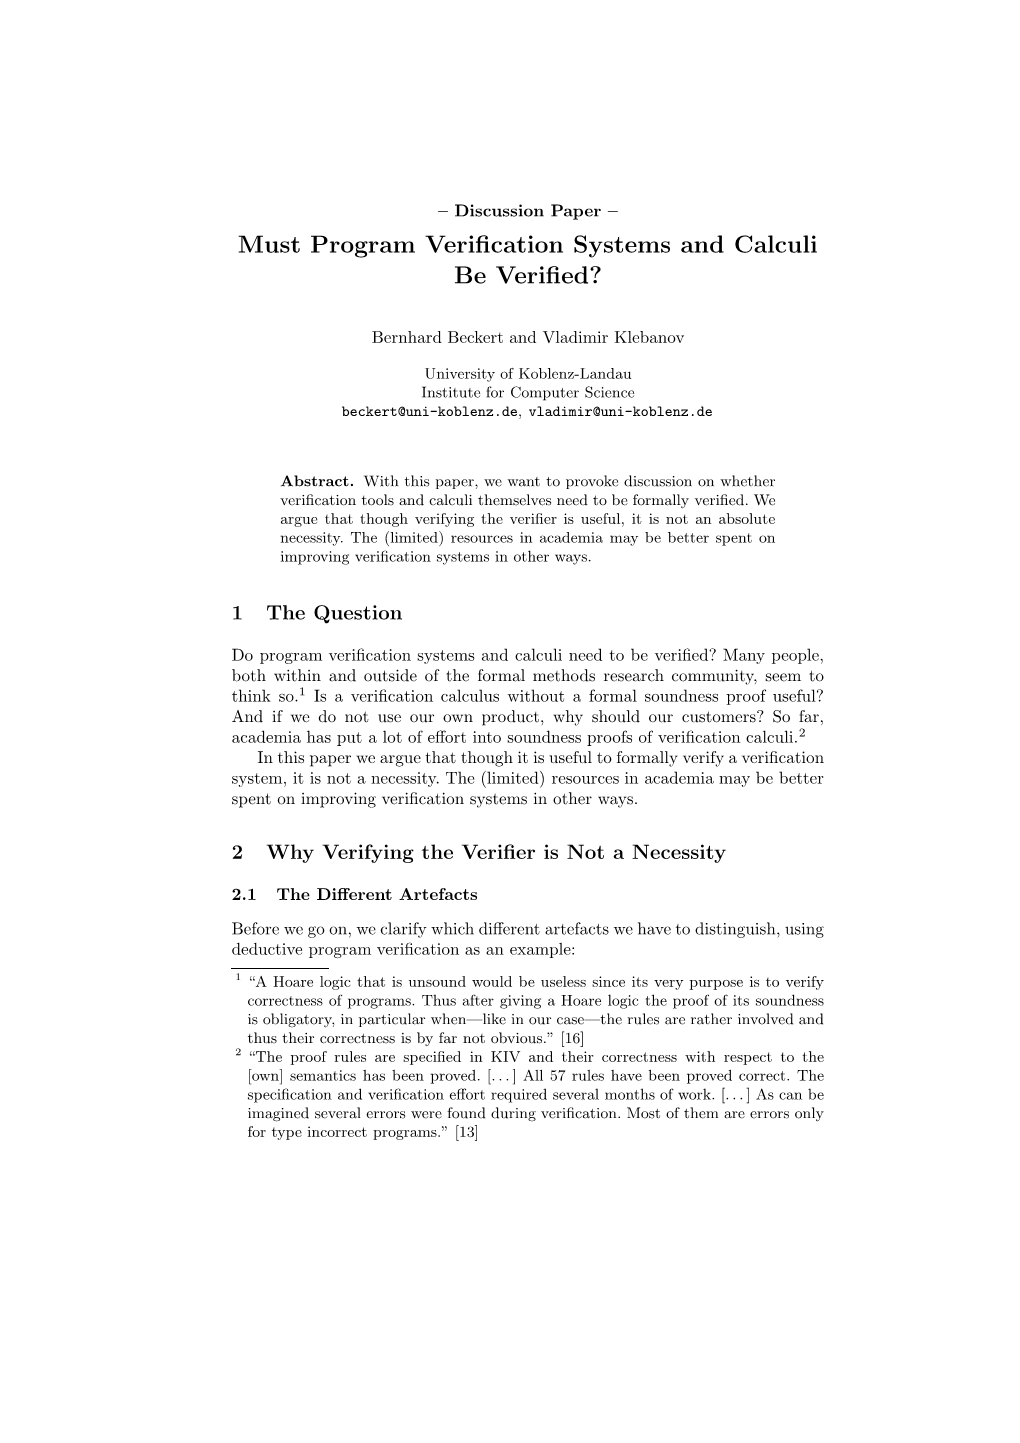 Must Program Verification Systems and Calculi Be Verified?